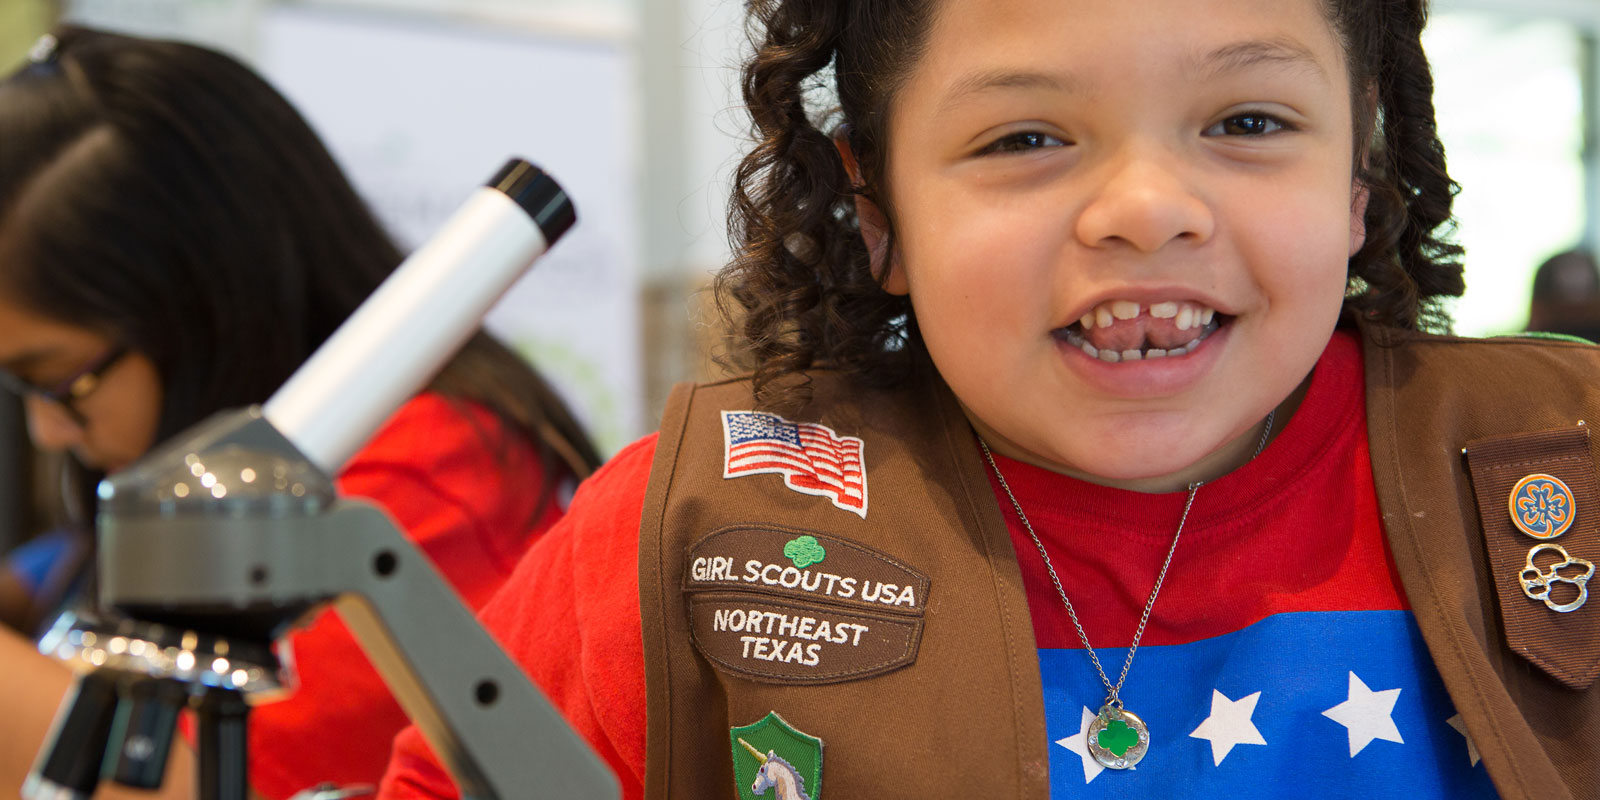 Girls Scouts of Northeast Texas